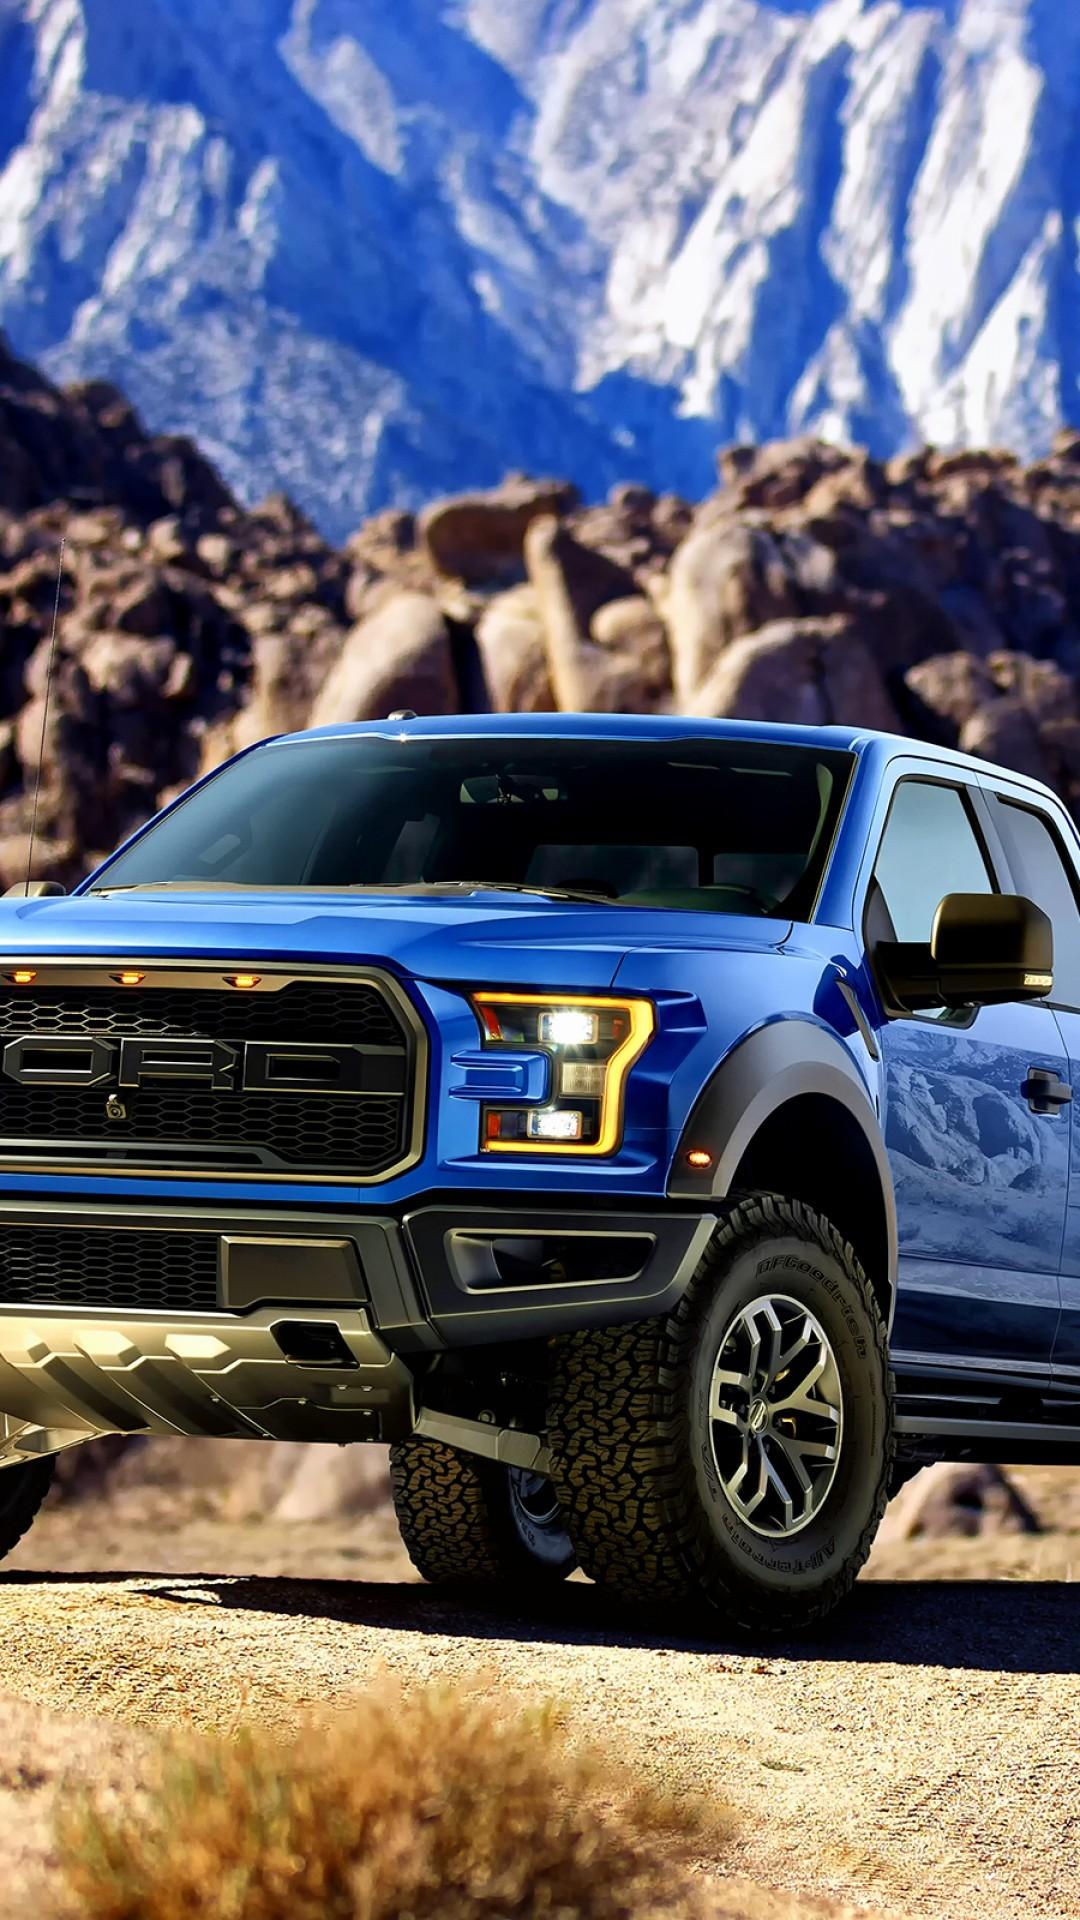 Ford Ranger Raptor iPhone Wallpapers - Wallpaper Cave